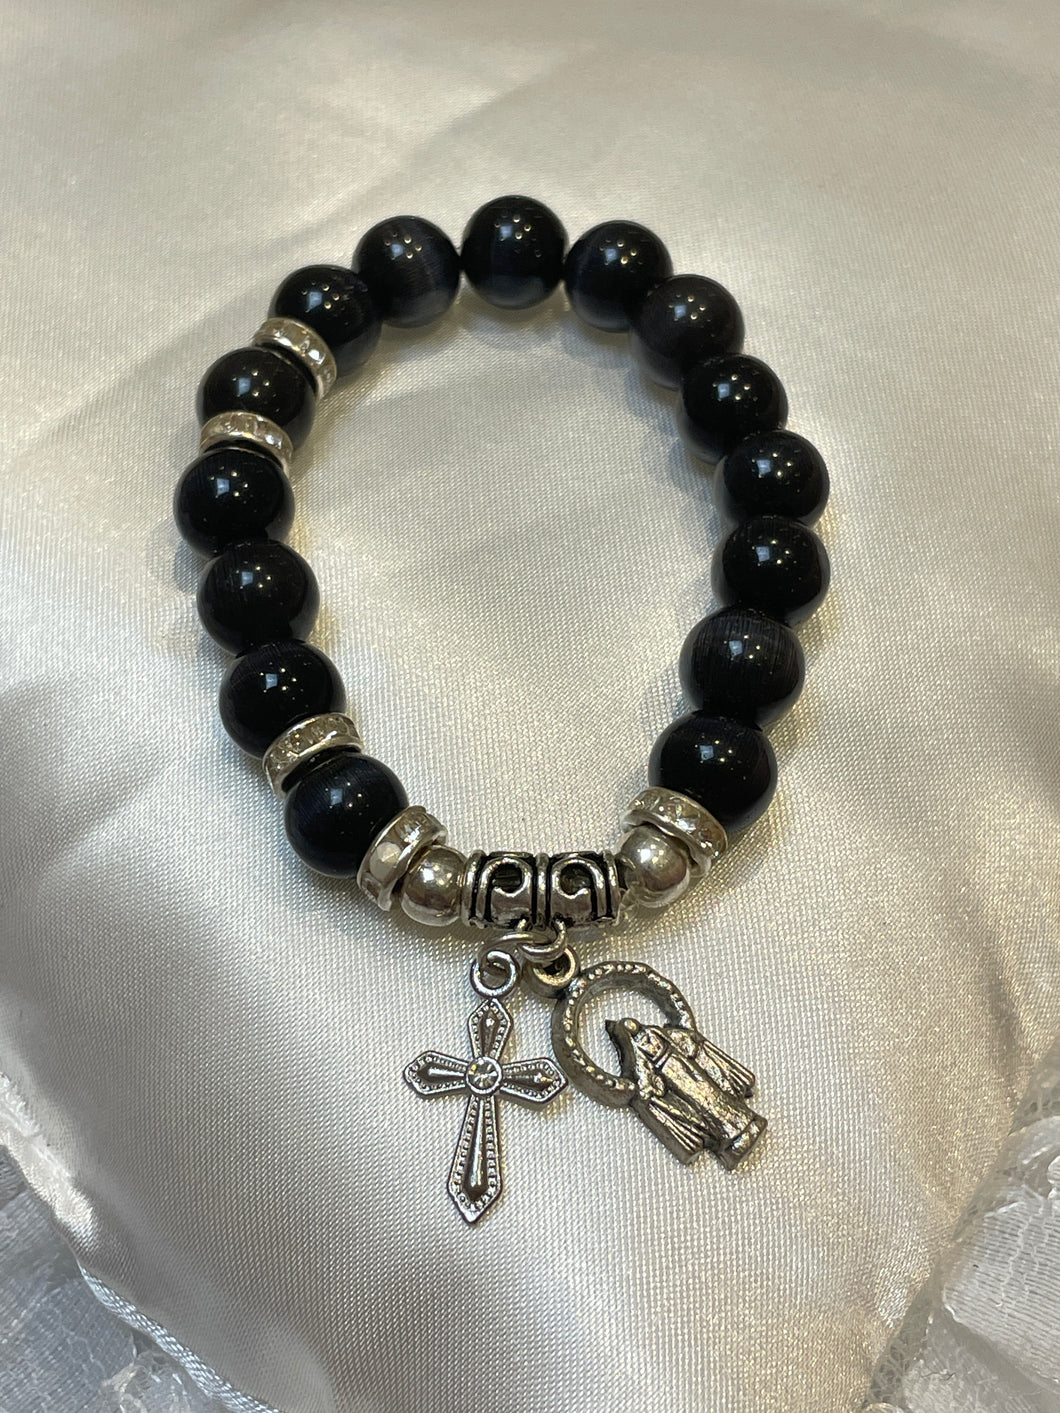 Black Gemstone Rosary Bracelet with Our Lady of Grace and Cross Charms